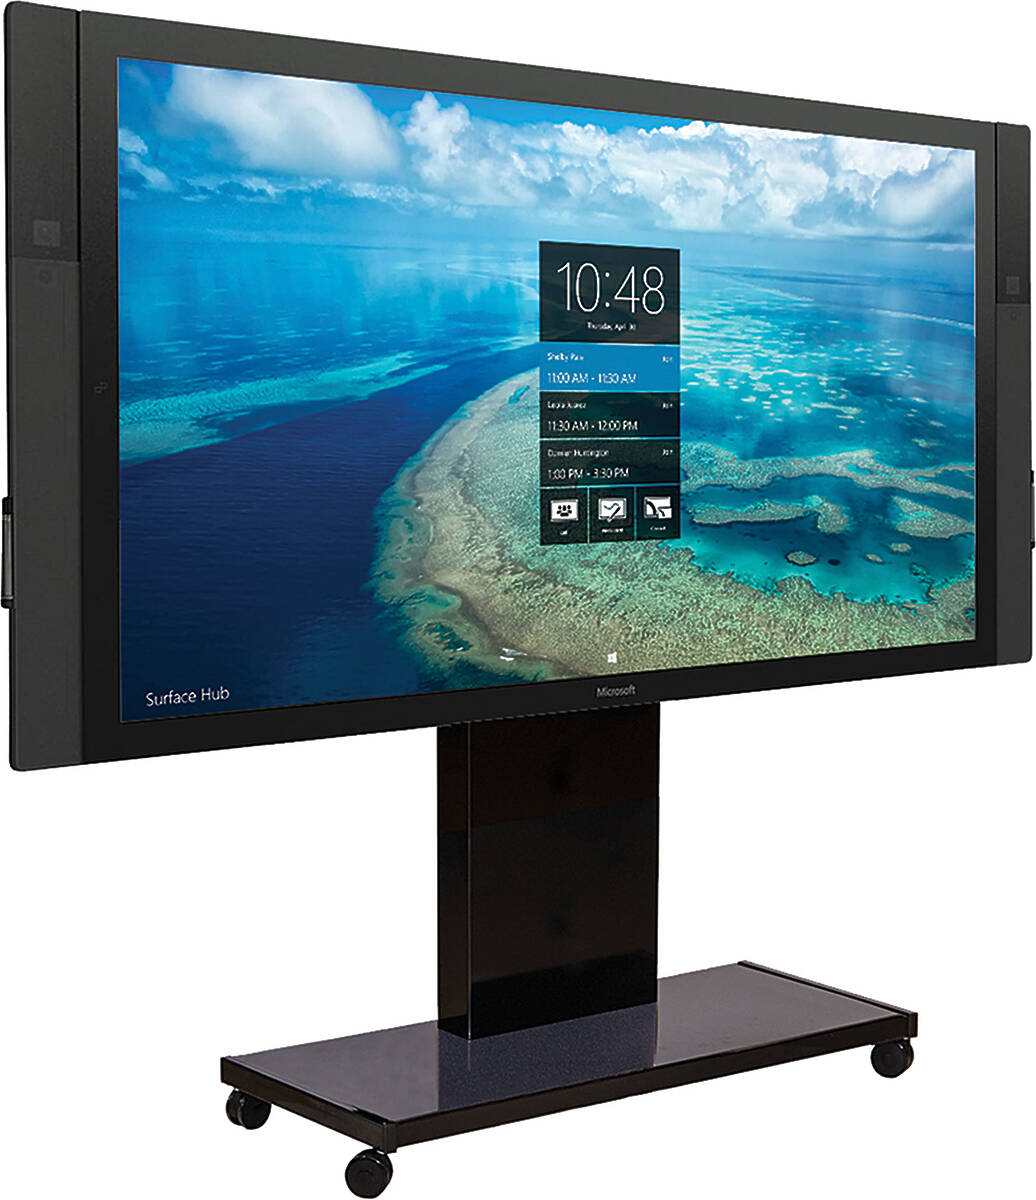 Unicol RH1HDSH84 Rhobus premium trolley for 84 inch Microsoft Surface product image. Click to enlarge.